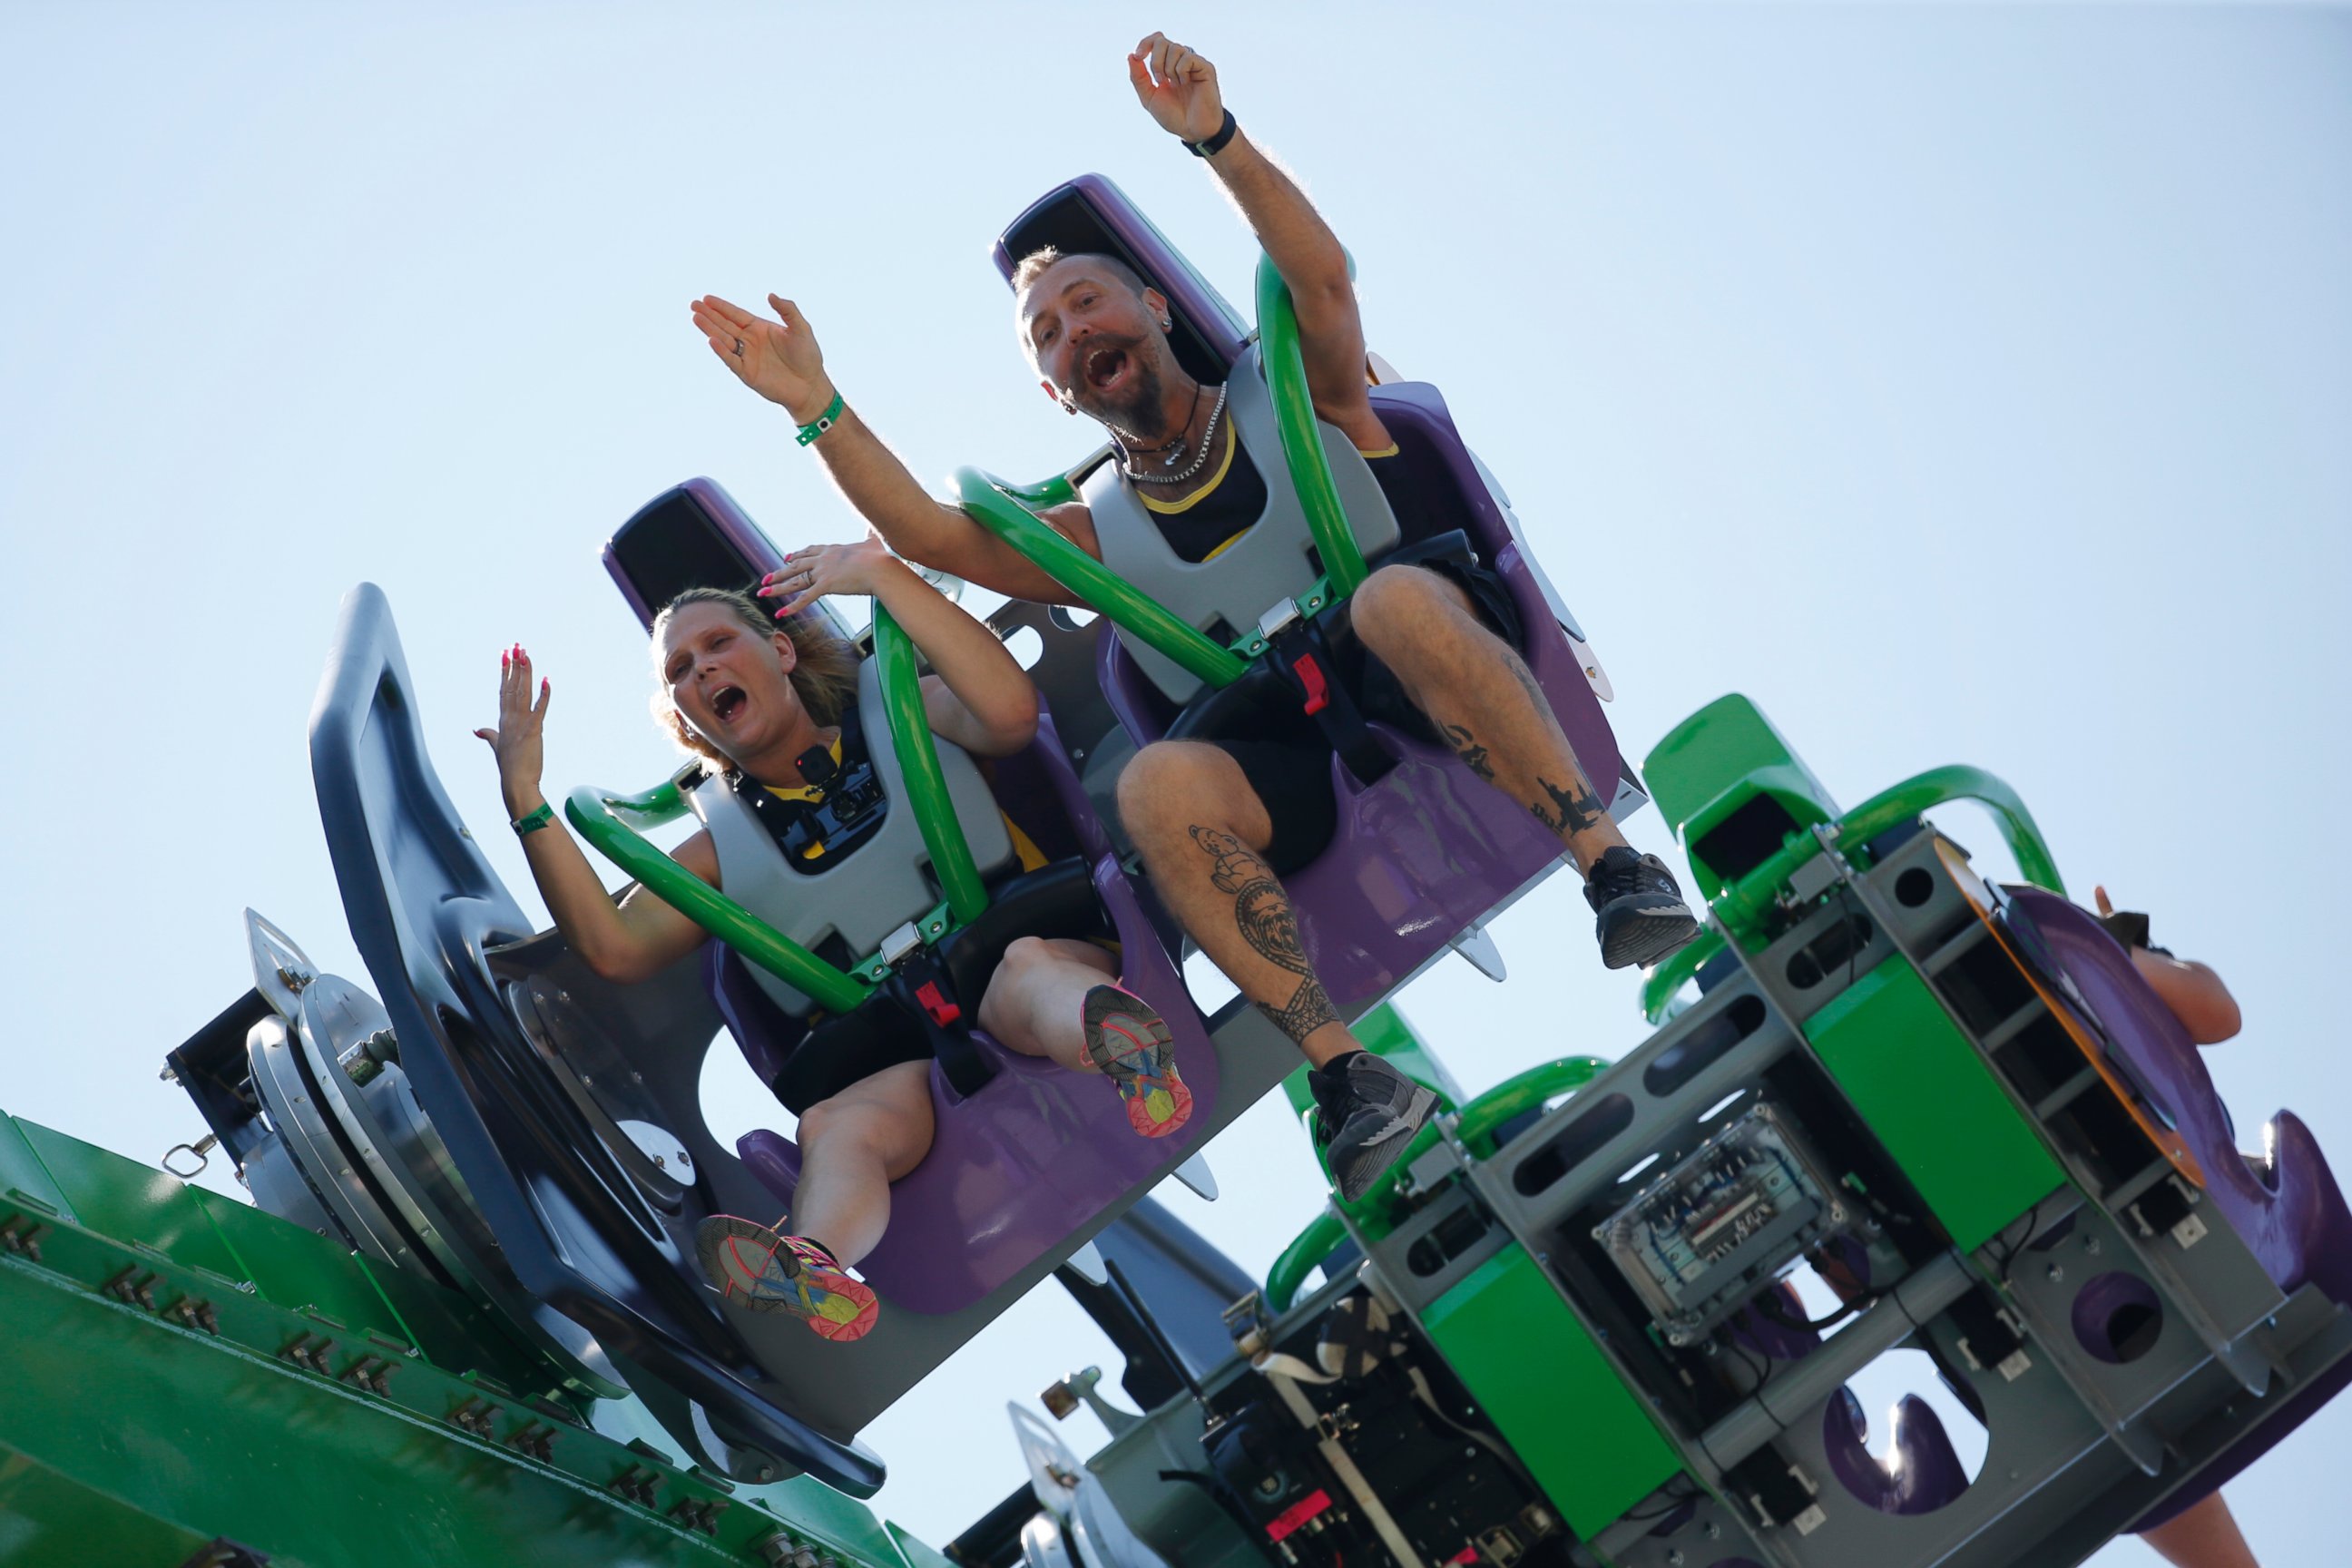 PHOTO: People ride "The Joker," at Six Flags Great Adventure, during the ride's unveiling on May 26, 2016, in Jackson, N.J.